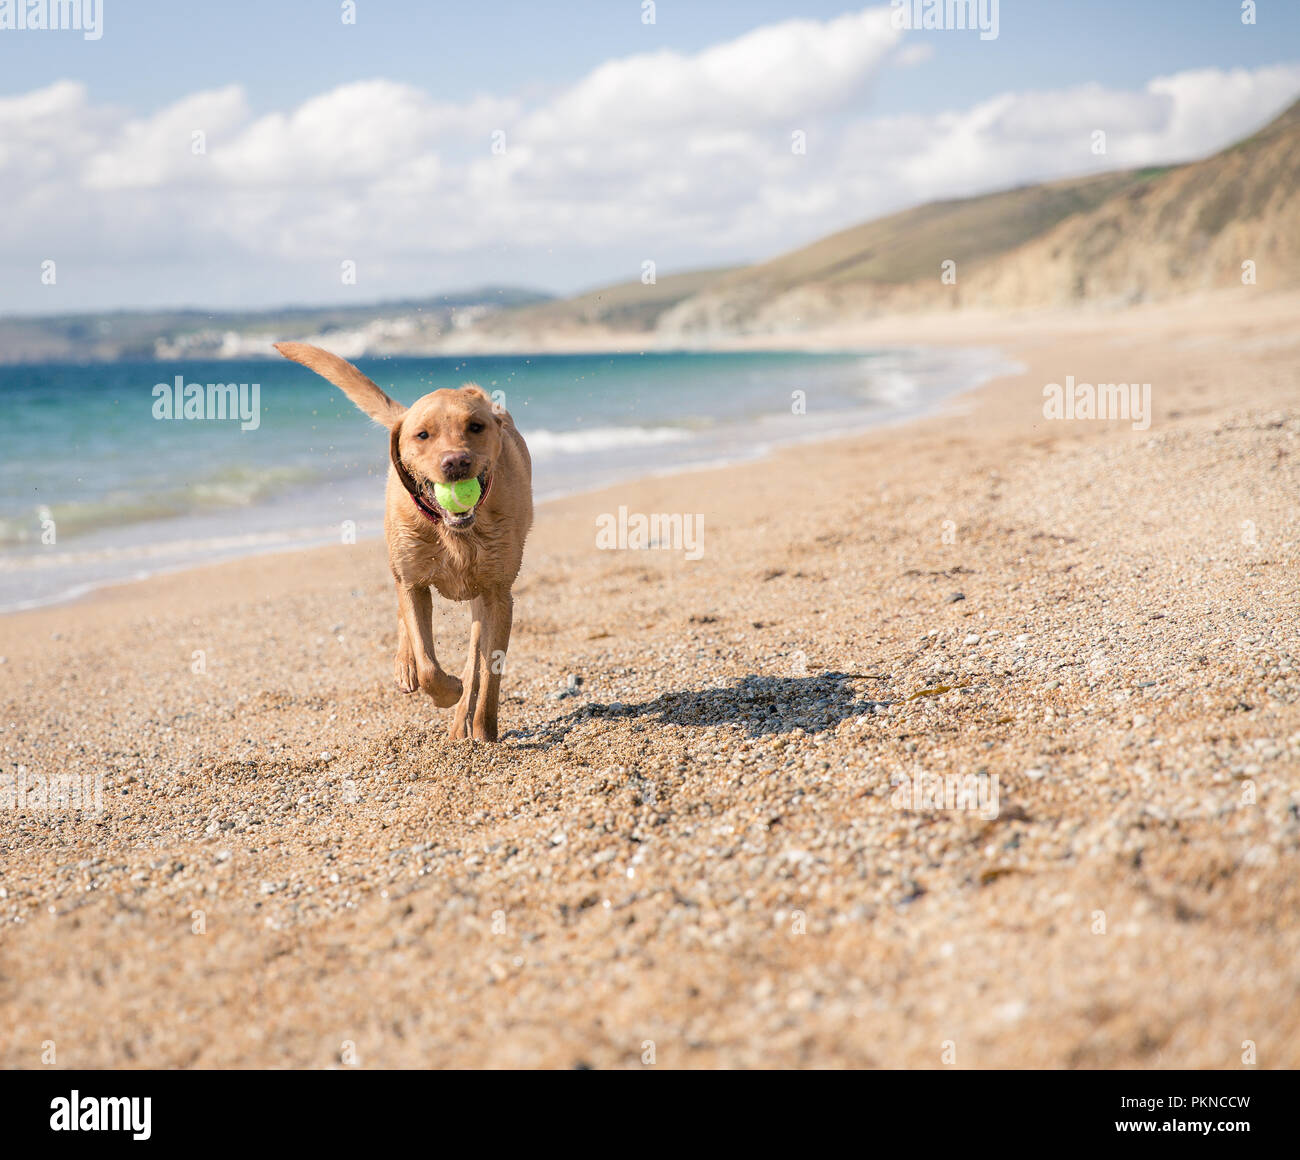 A happy, yellow Labrador retriever dog running on a deserted sandy beach and carrying or fetching a tennis ball in its mouth Stock Photo